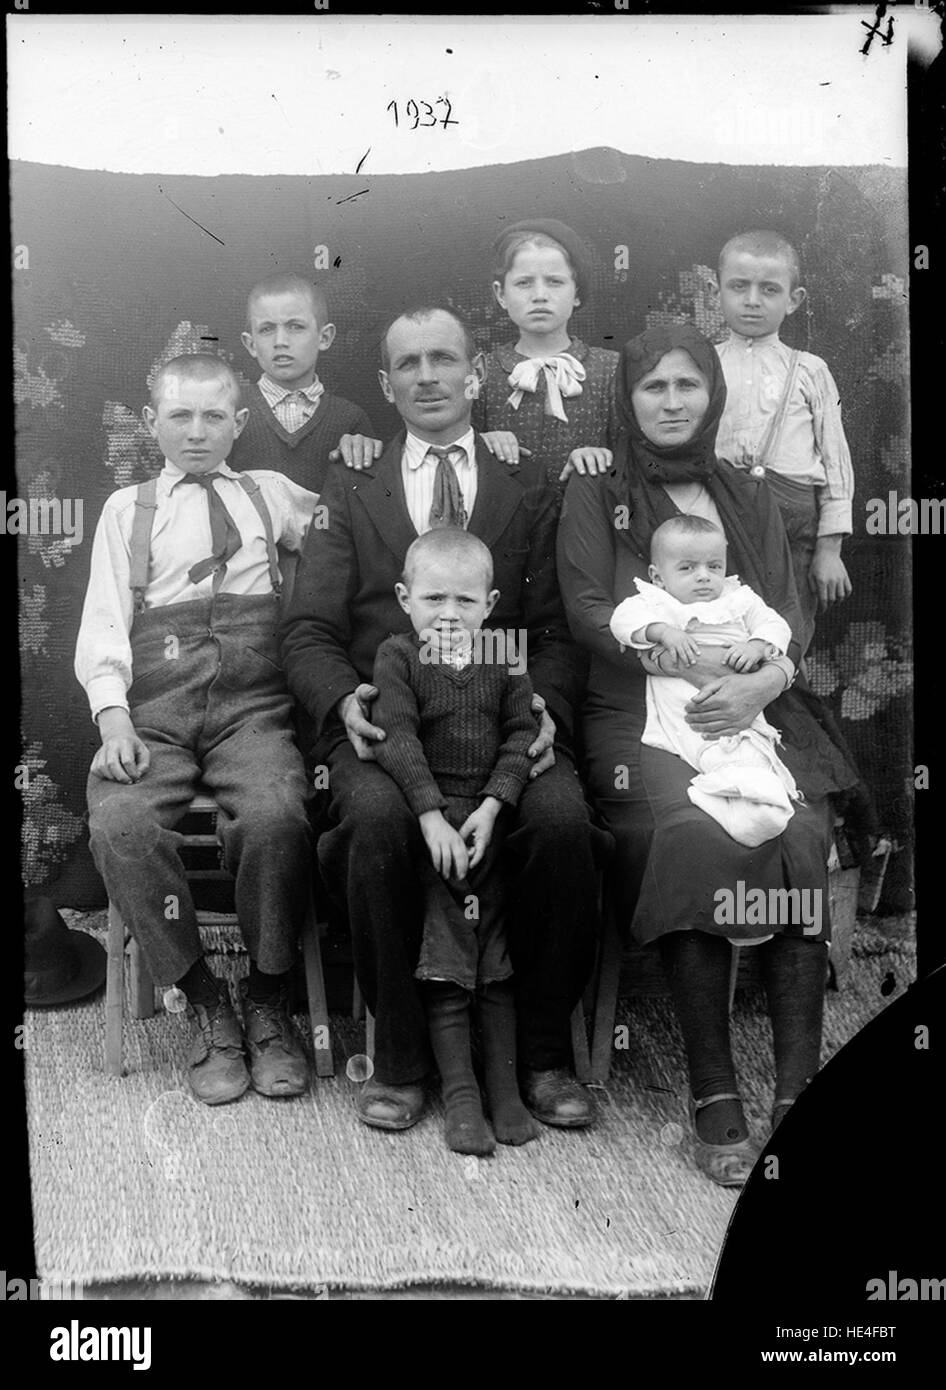 Inv. 193, 2 imagini: Portrete de familie, 1937  The project Costică Acsinte Archive needs help: please donate and share the link igg.me/at/acsinte/x/6146081 ( http://igg.me/at/acsinte/x/6146081 )   DAM by IDimager www.idimager.com/WP/?page id=20 ( http://www.idimager.com/WP/?page id=20 ) Stock Photo